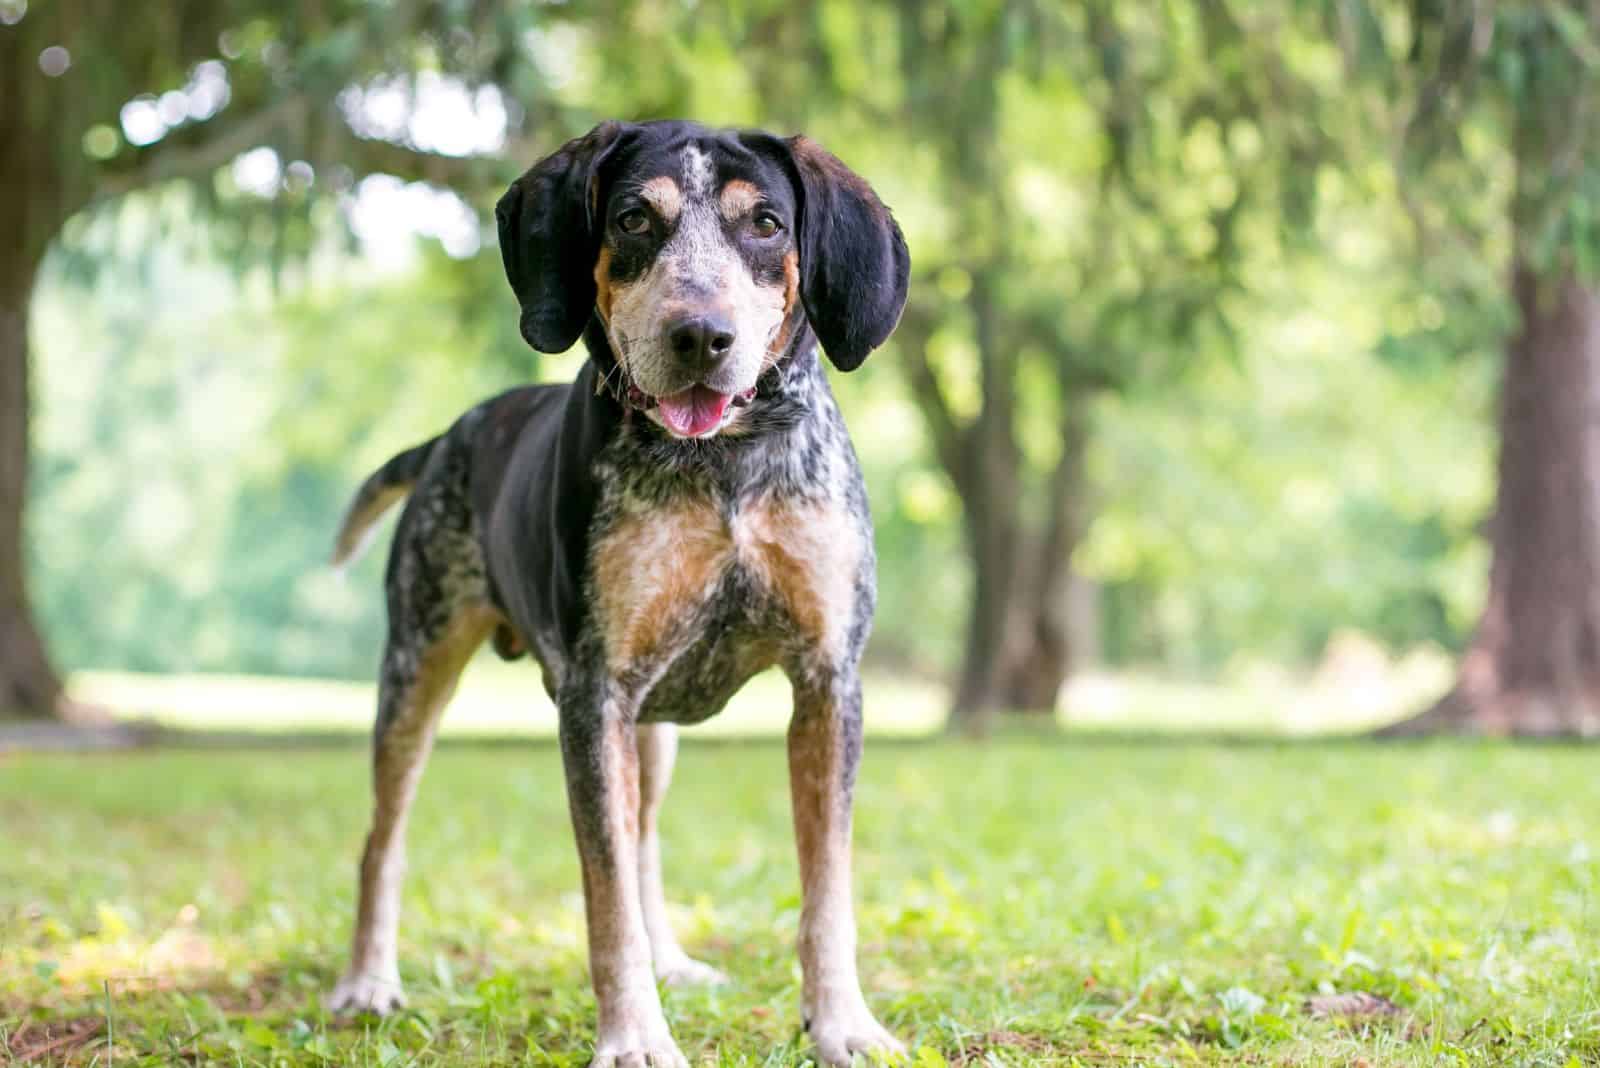 Coonhound standing in a field